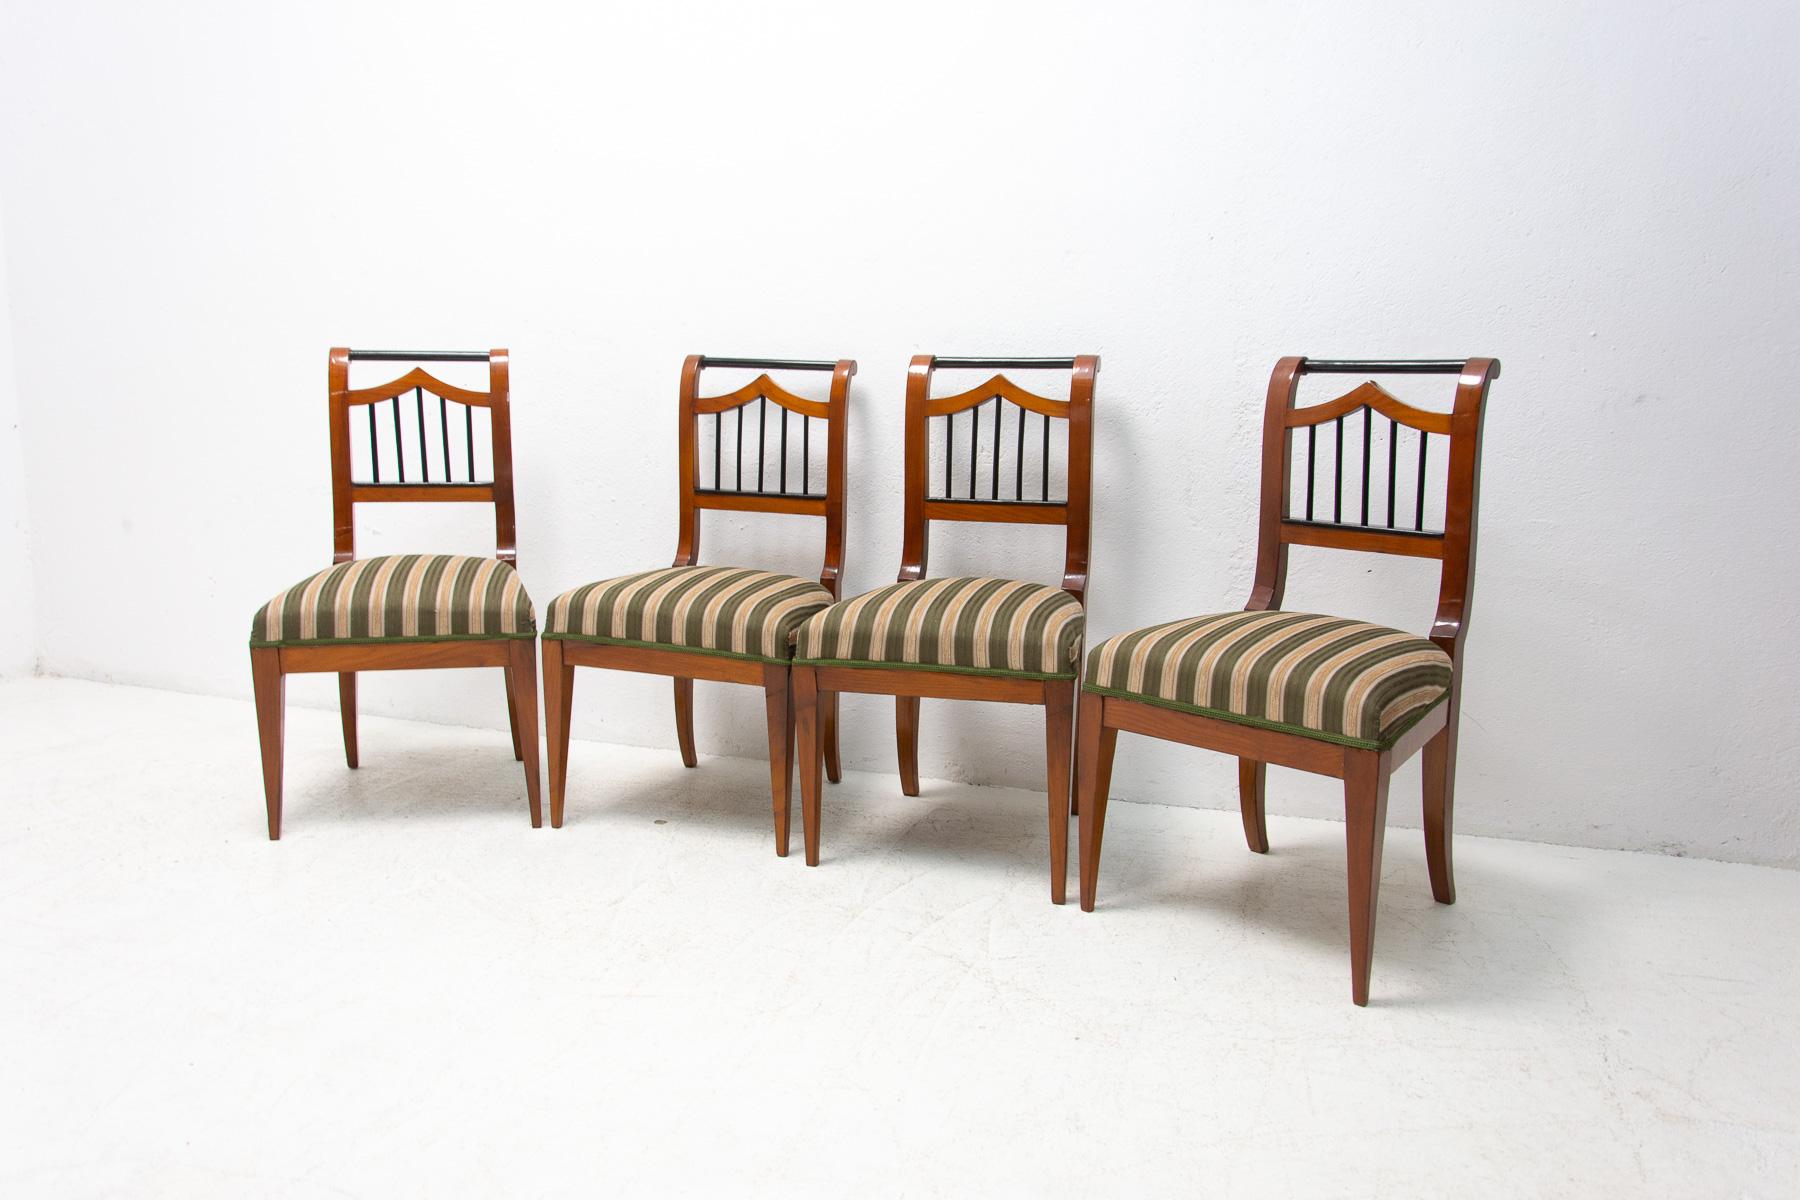 19th Century Fully Restored Biedermeier Dining Chairs, Austria-Hungary, 1830´s, Set of 4